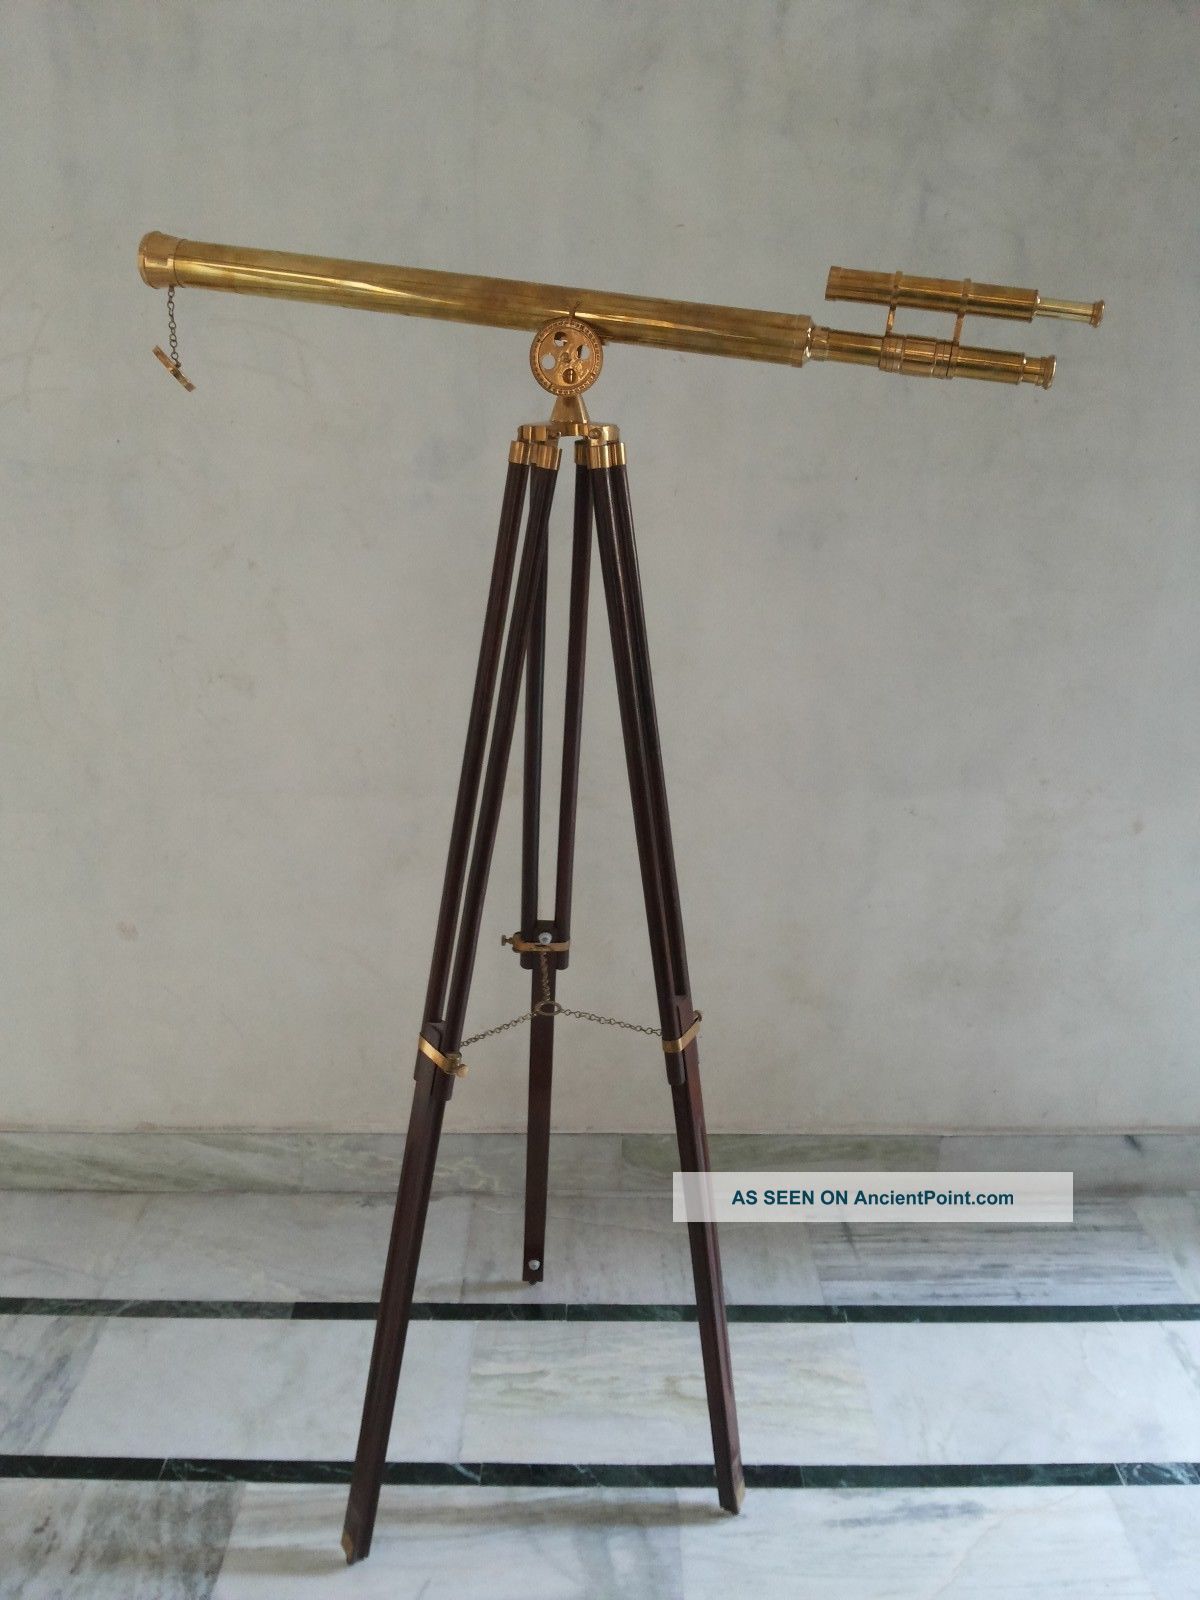 Brass Telescope Double Barrel Griffith Astro With Wooden Tripod Stand Telescopes photo